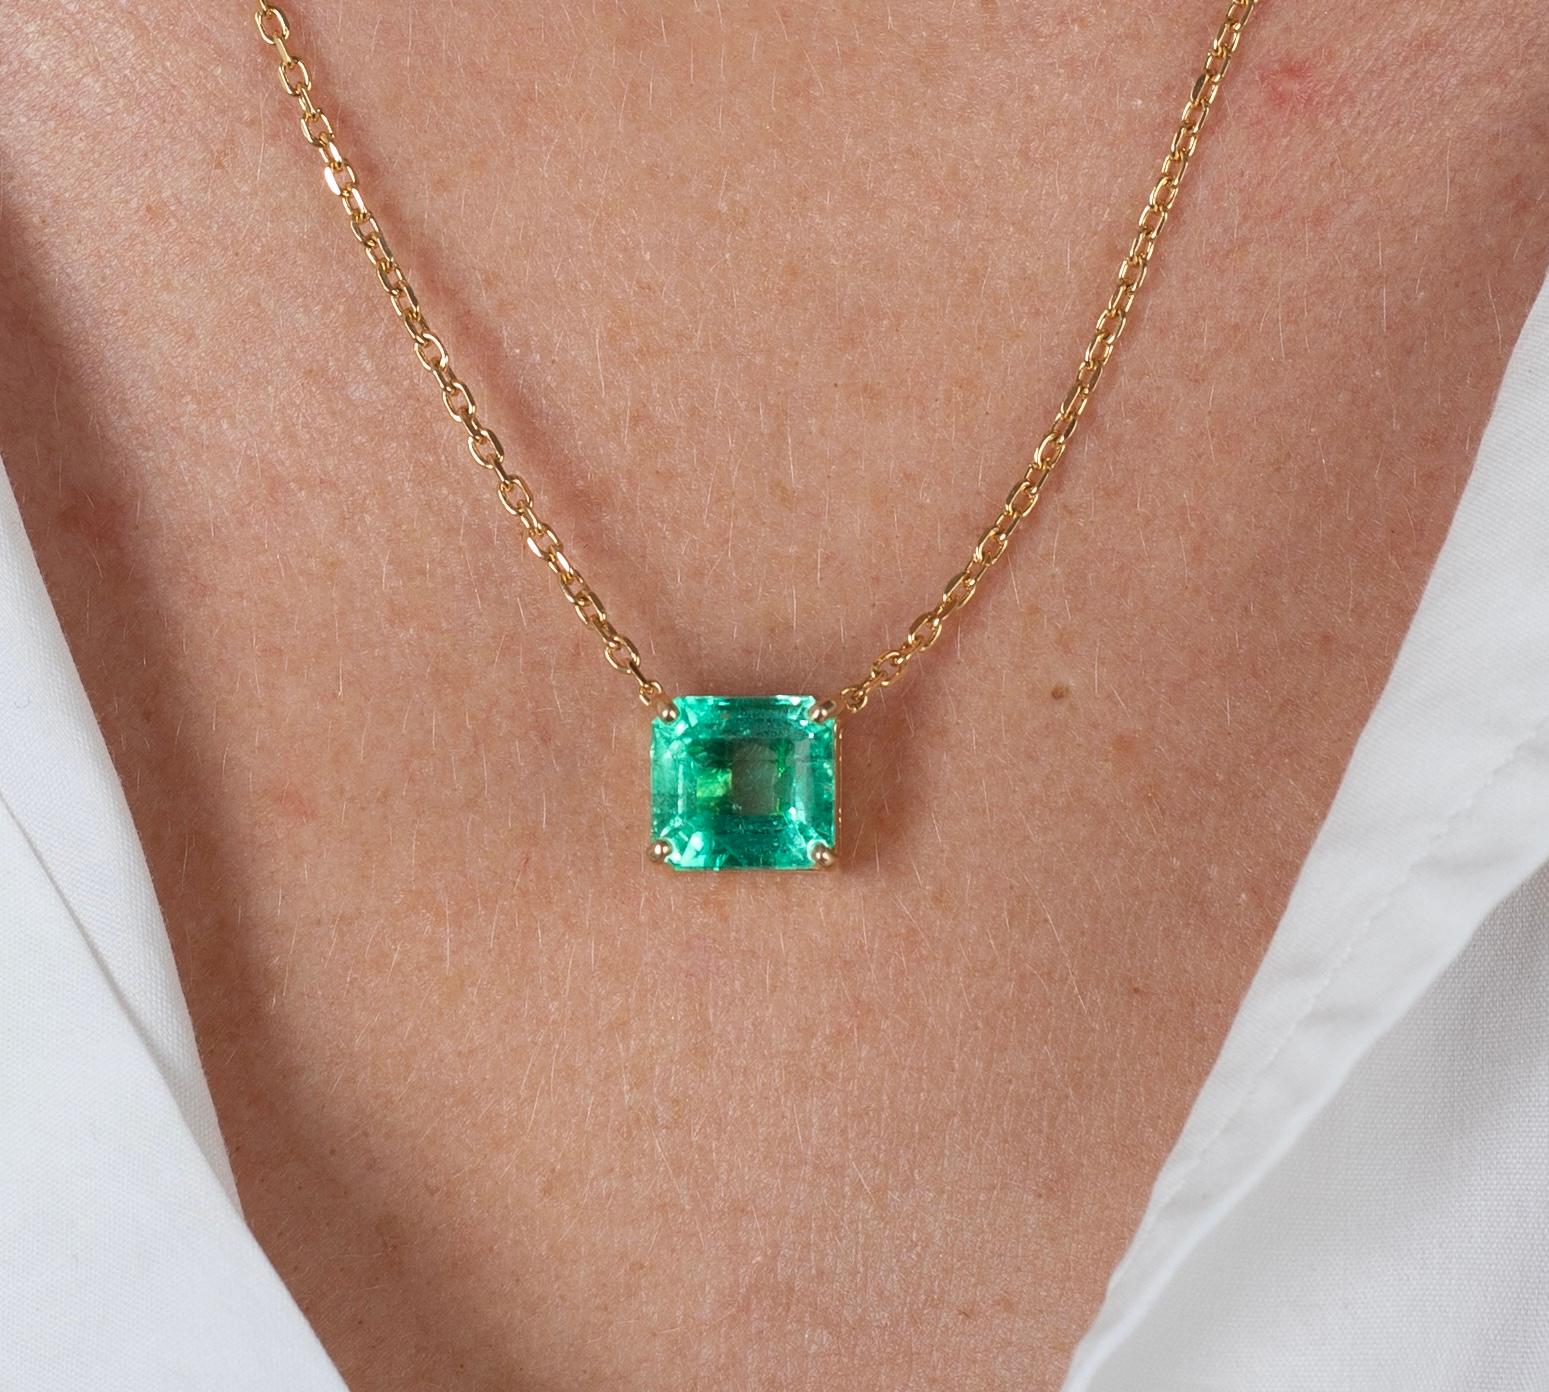 Vivid green emerald cut Colombian Emerald with minor oil treatment. The center stone features excellent luster, transparency, and brilliance. Set in an 18k solid gold floating-style cable chain necklace. The setting back provides excellent contrast